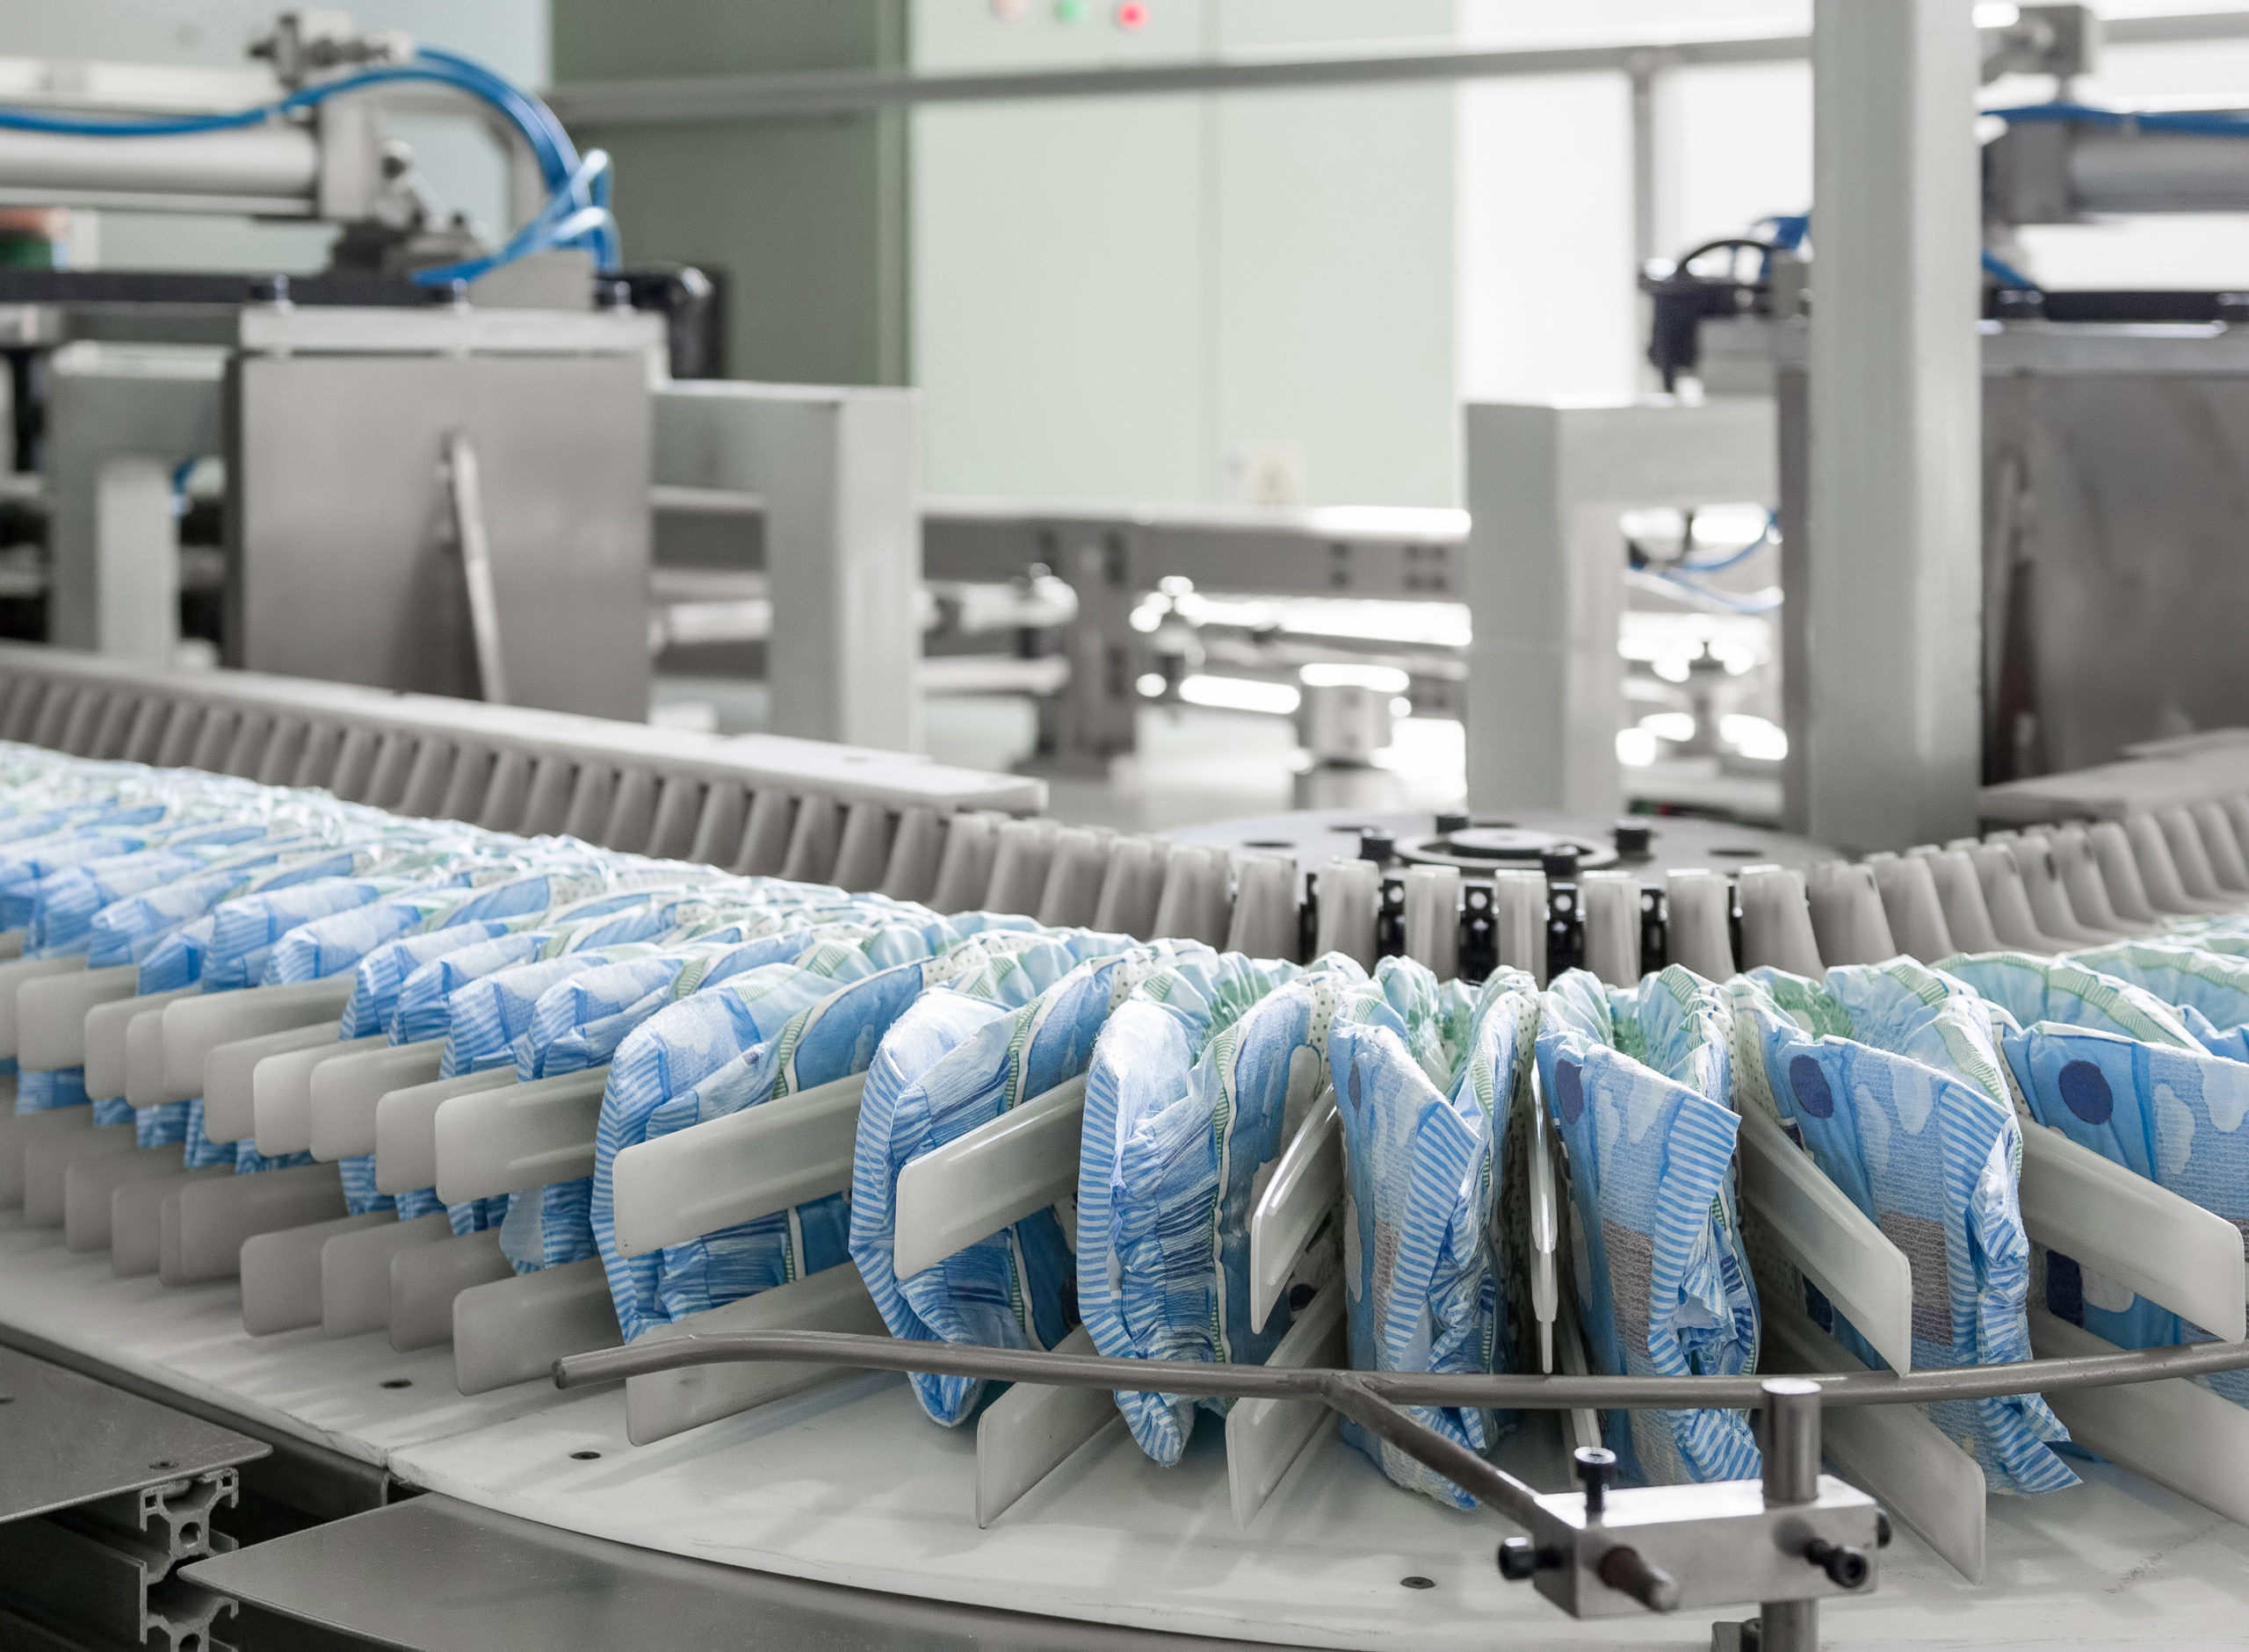 Diapers on manufacturing production equipment